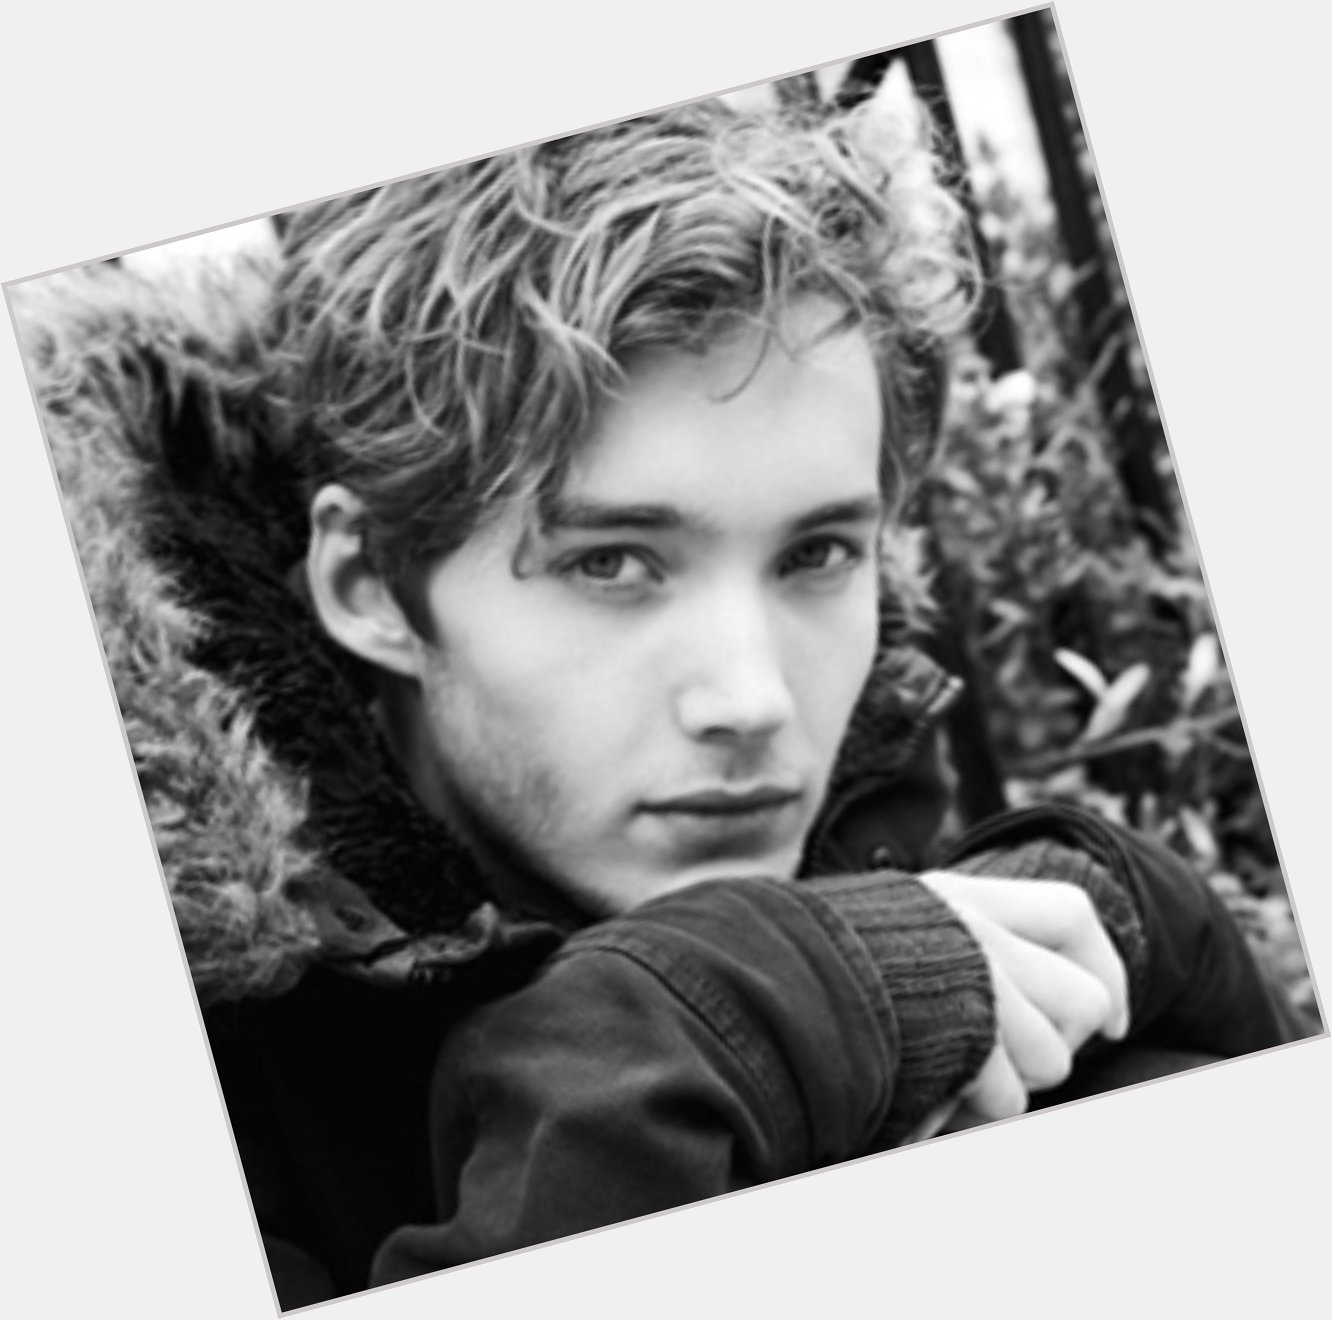   Happy Birthday To An Awesome Actor Toby Regbo!!      